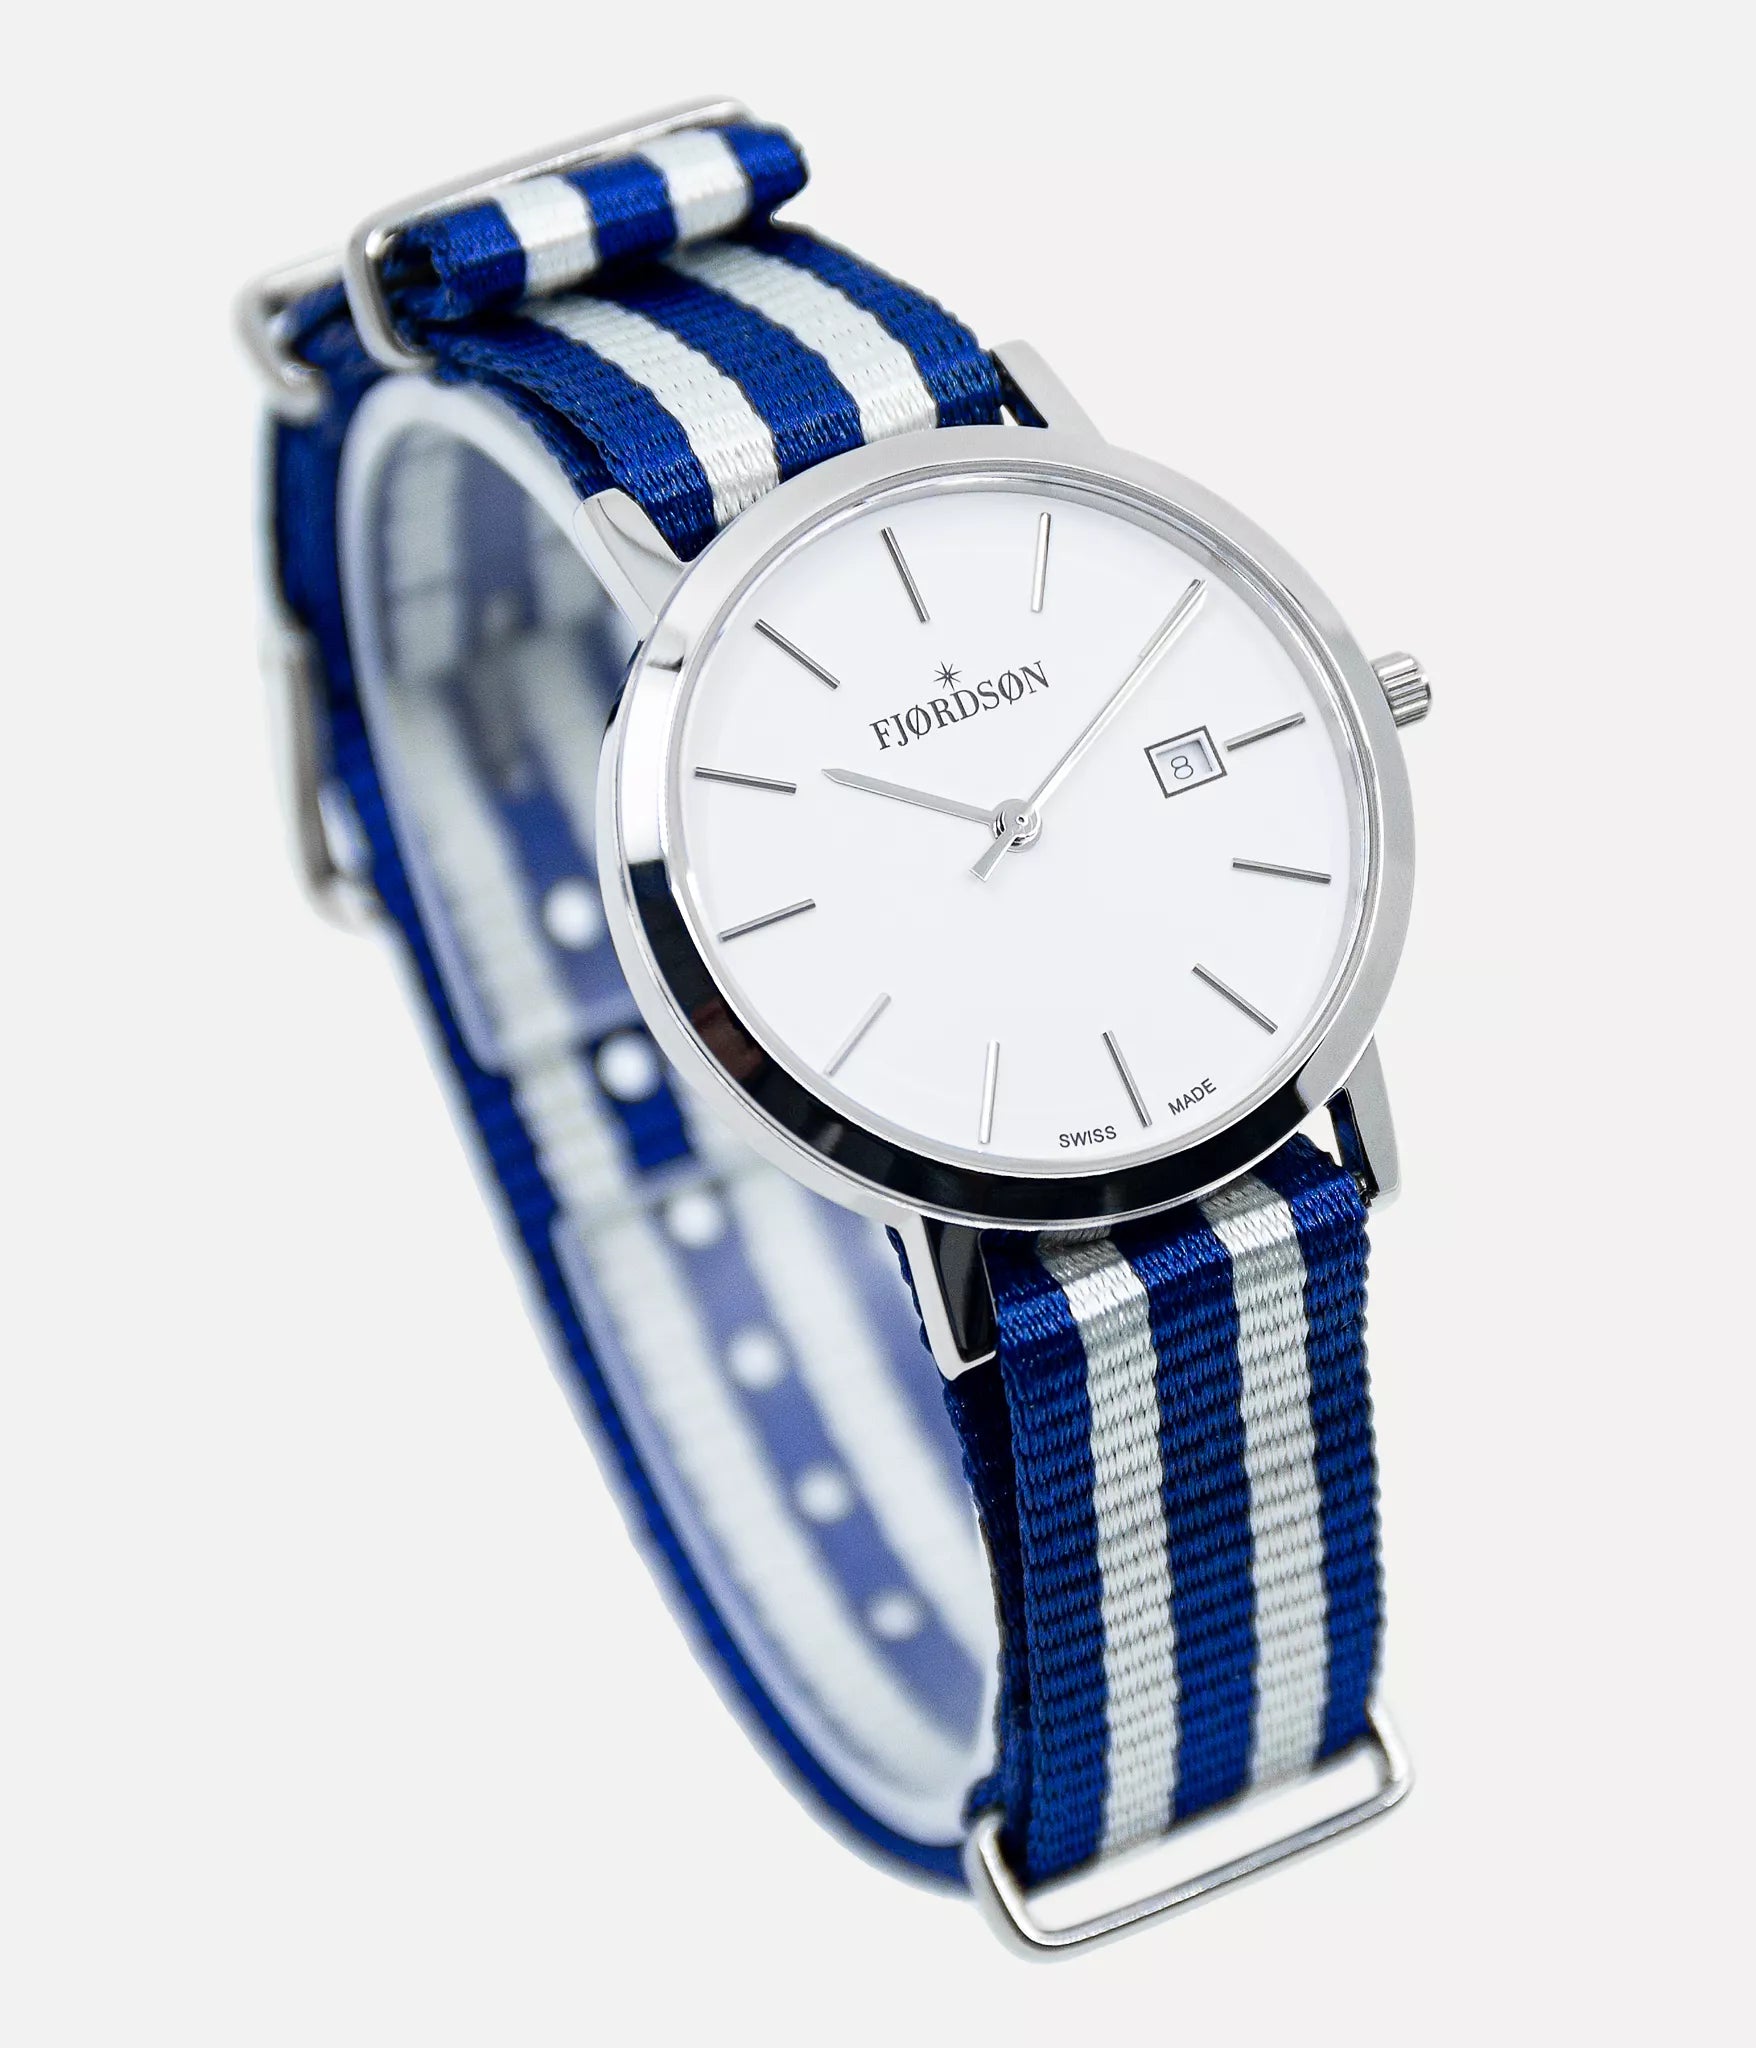 Front shot - Fjordson watch with white dial and blue/white NATO nylon watch strap - Women's Watch - vegan & approved by PETA - Swiss made